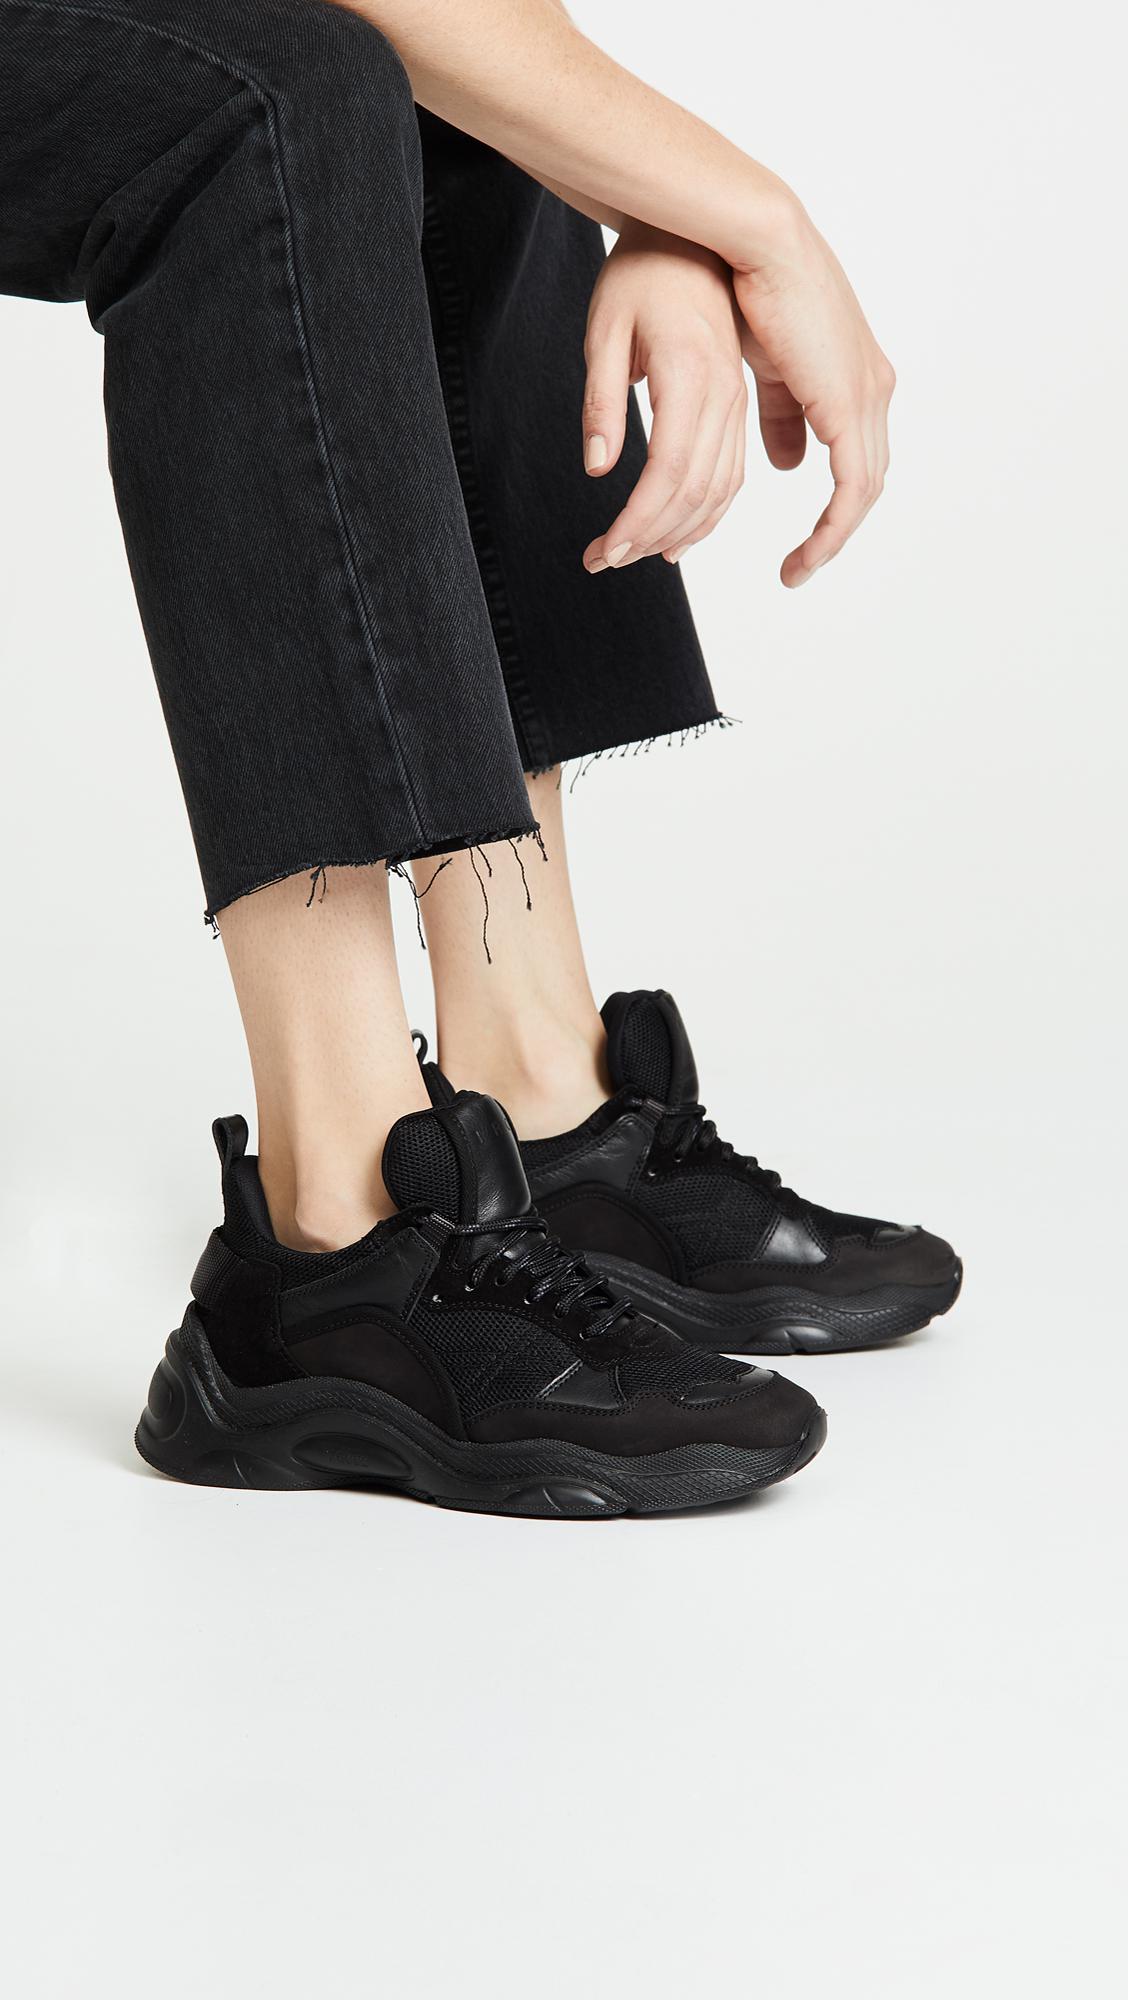 IRO Leather Curverunner Sneakers in Black - Lyst